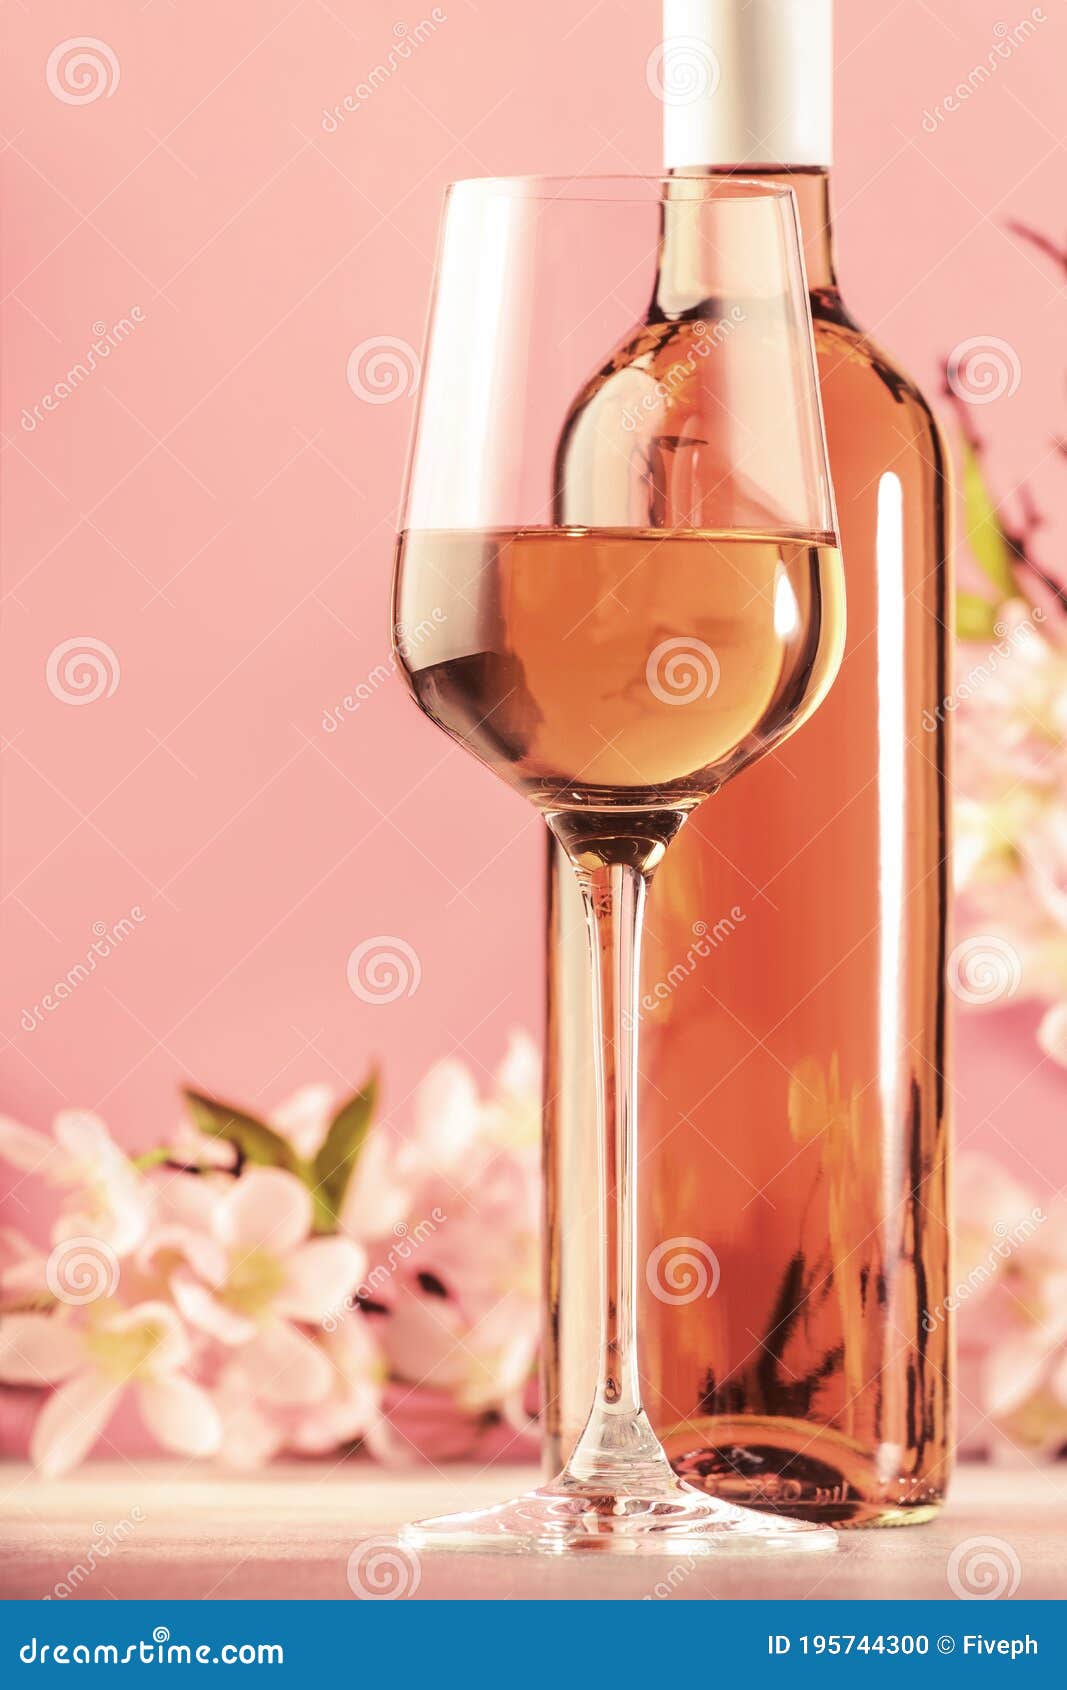 rose wine glass with bottle and pink flowers. rosado, rosato or blush wine tasting in wineshop, bar concept. copy space